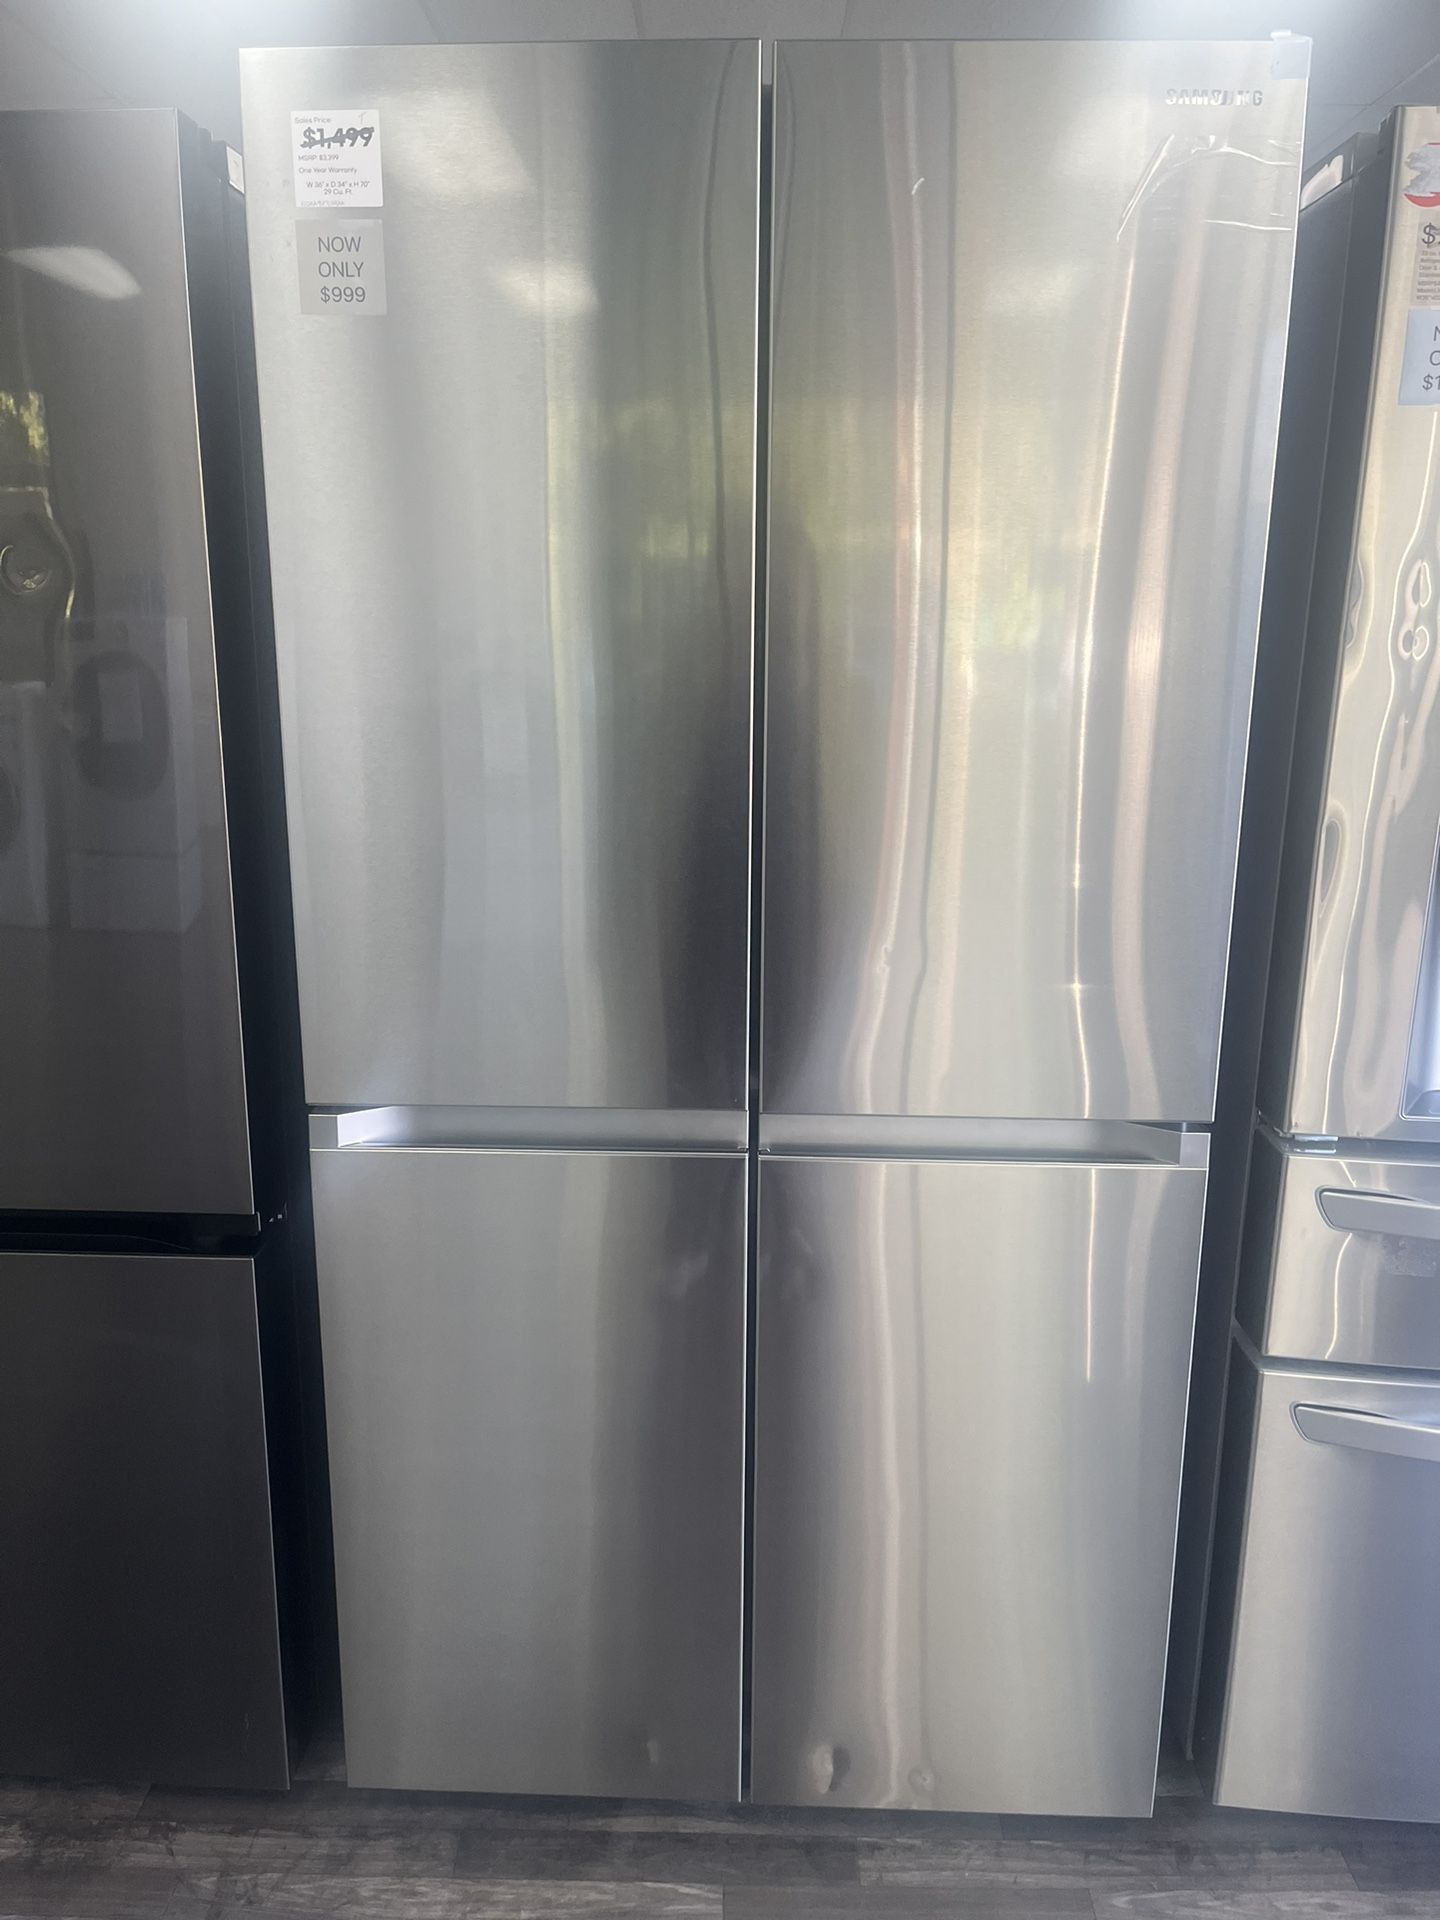 Limited Time ! $999 Samsung Side By Side French Door Refrigerator With Beverage Center Was$3299